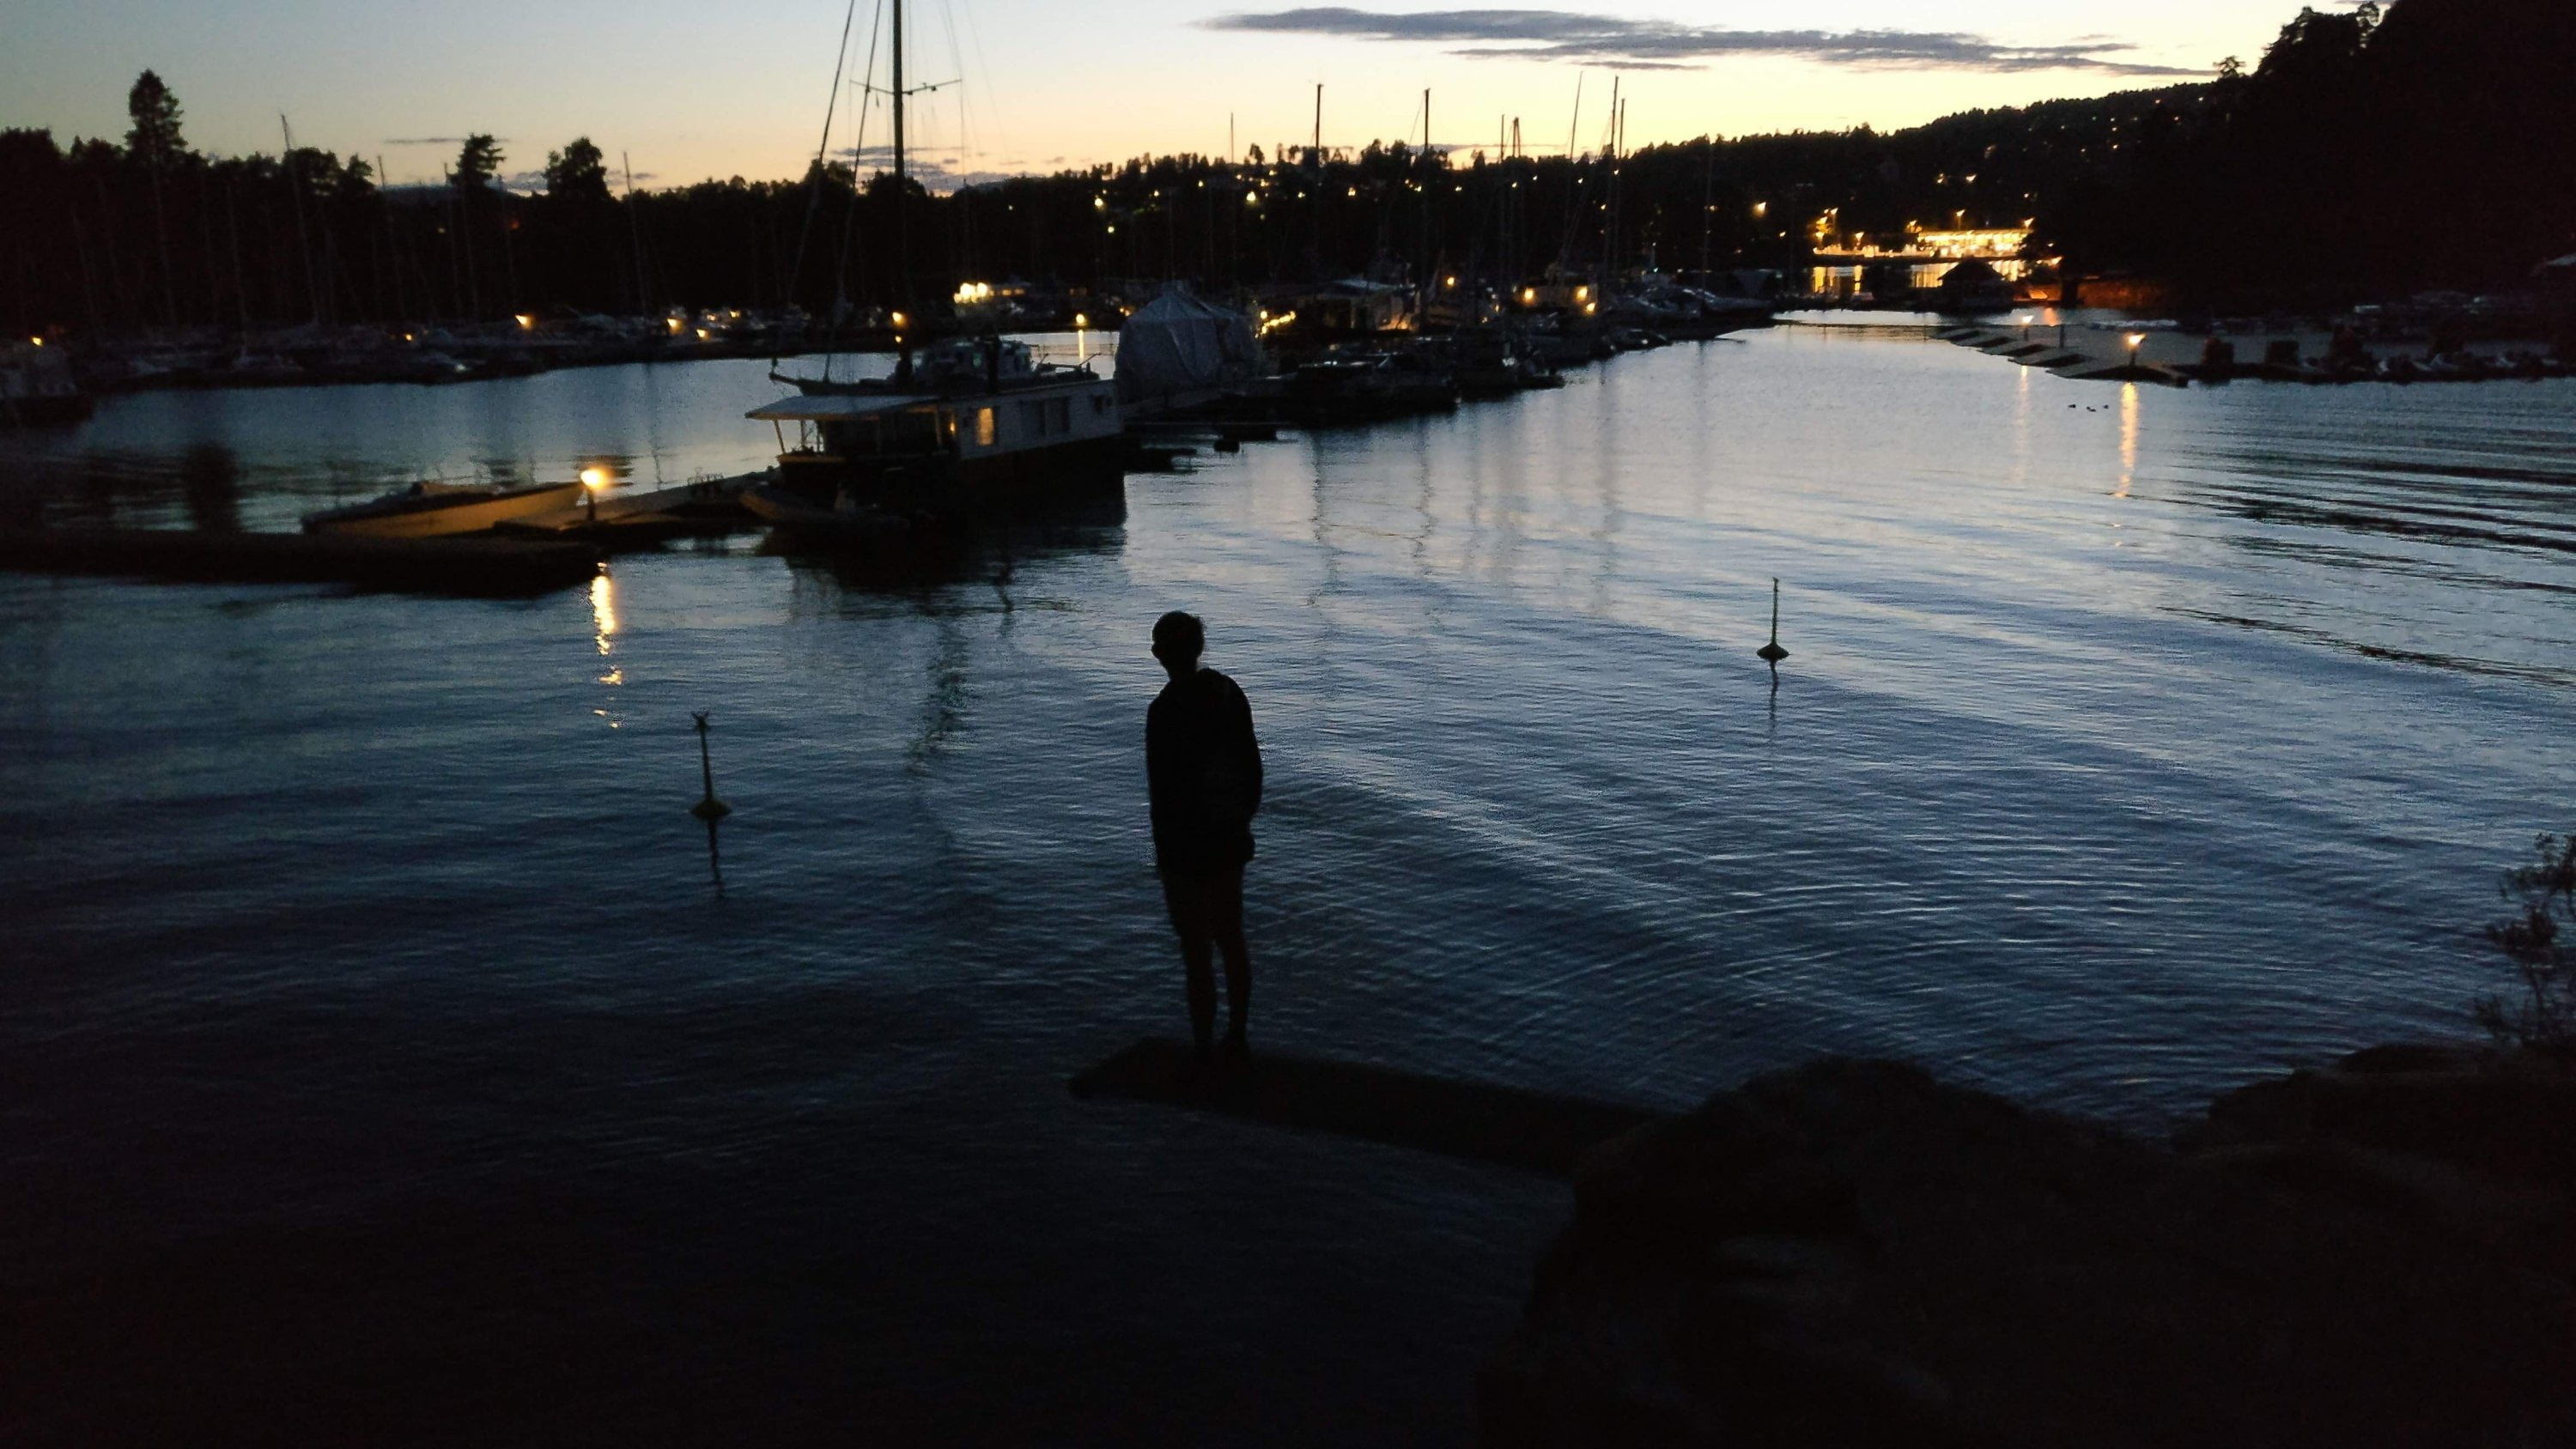 A picture of my friend by night, standing on a diving board in front of Killingen's harbor.